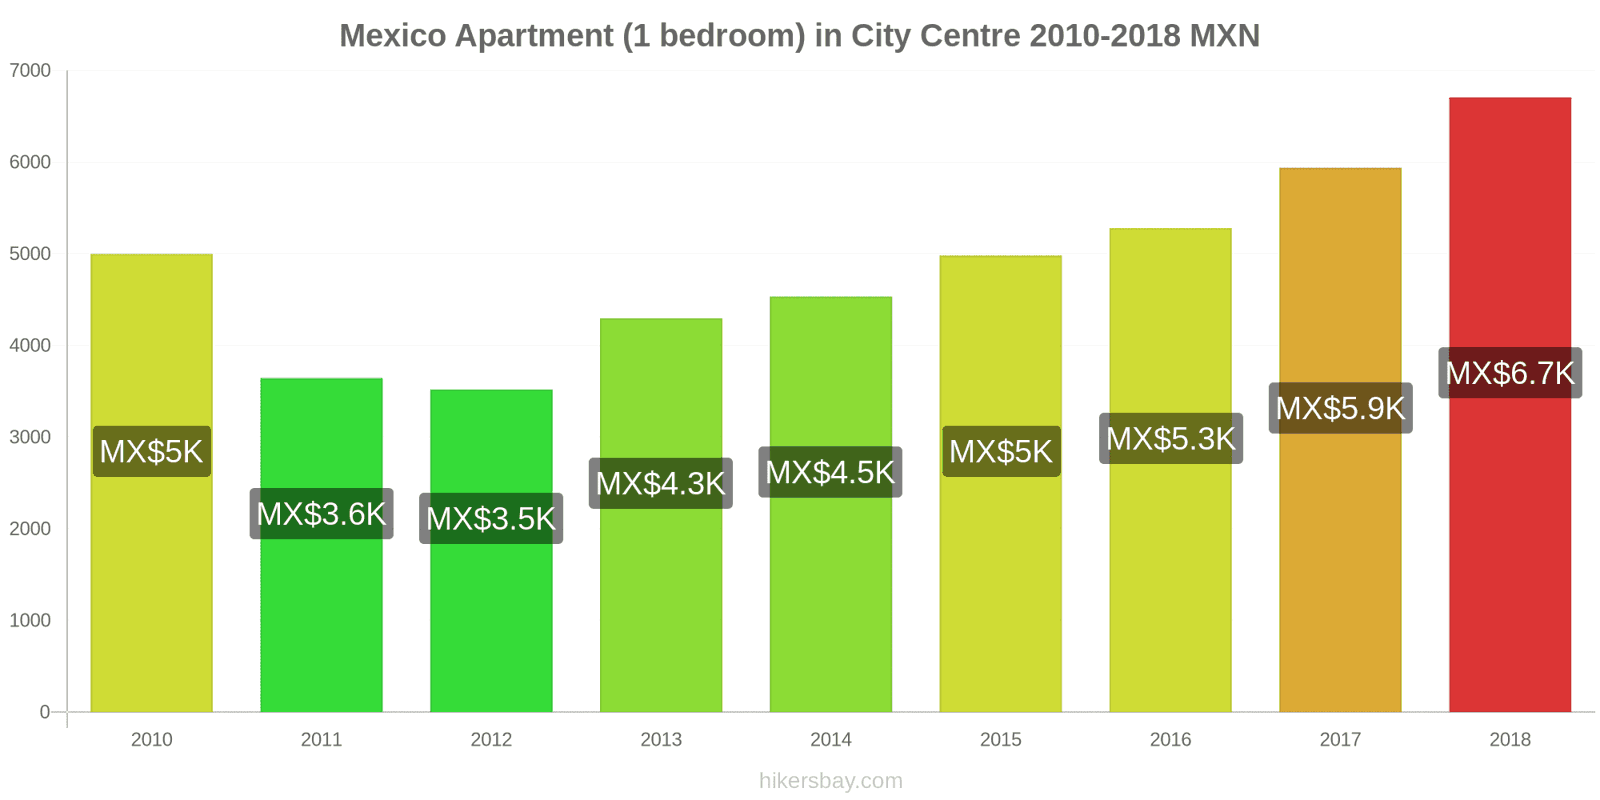 Mexico price changes Apartment (1 bedroom) in city centre hikersbay.com